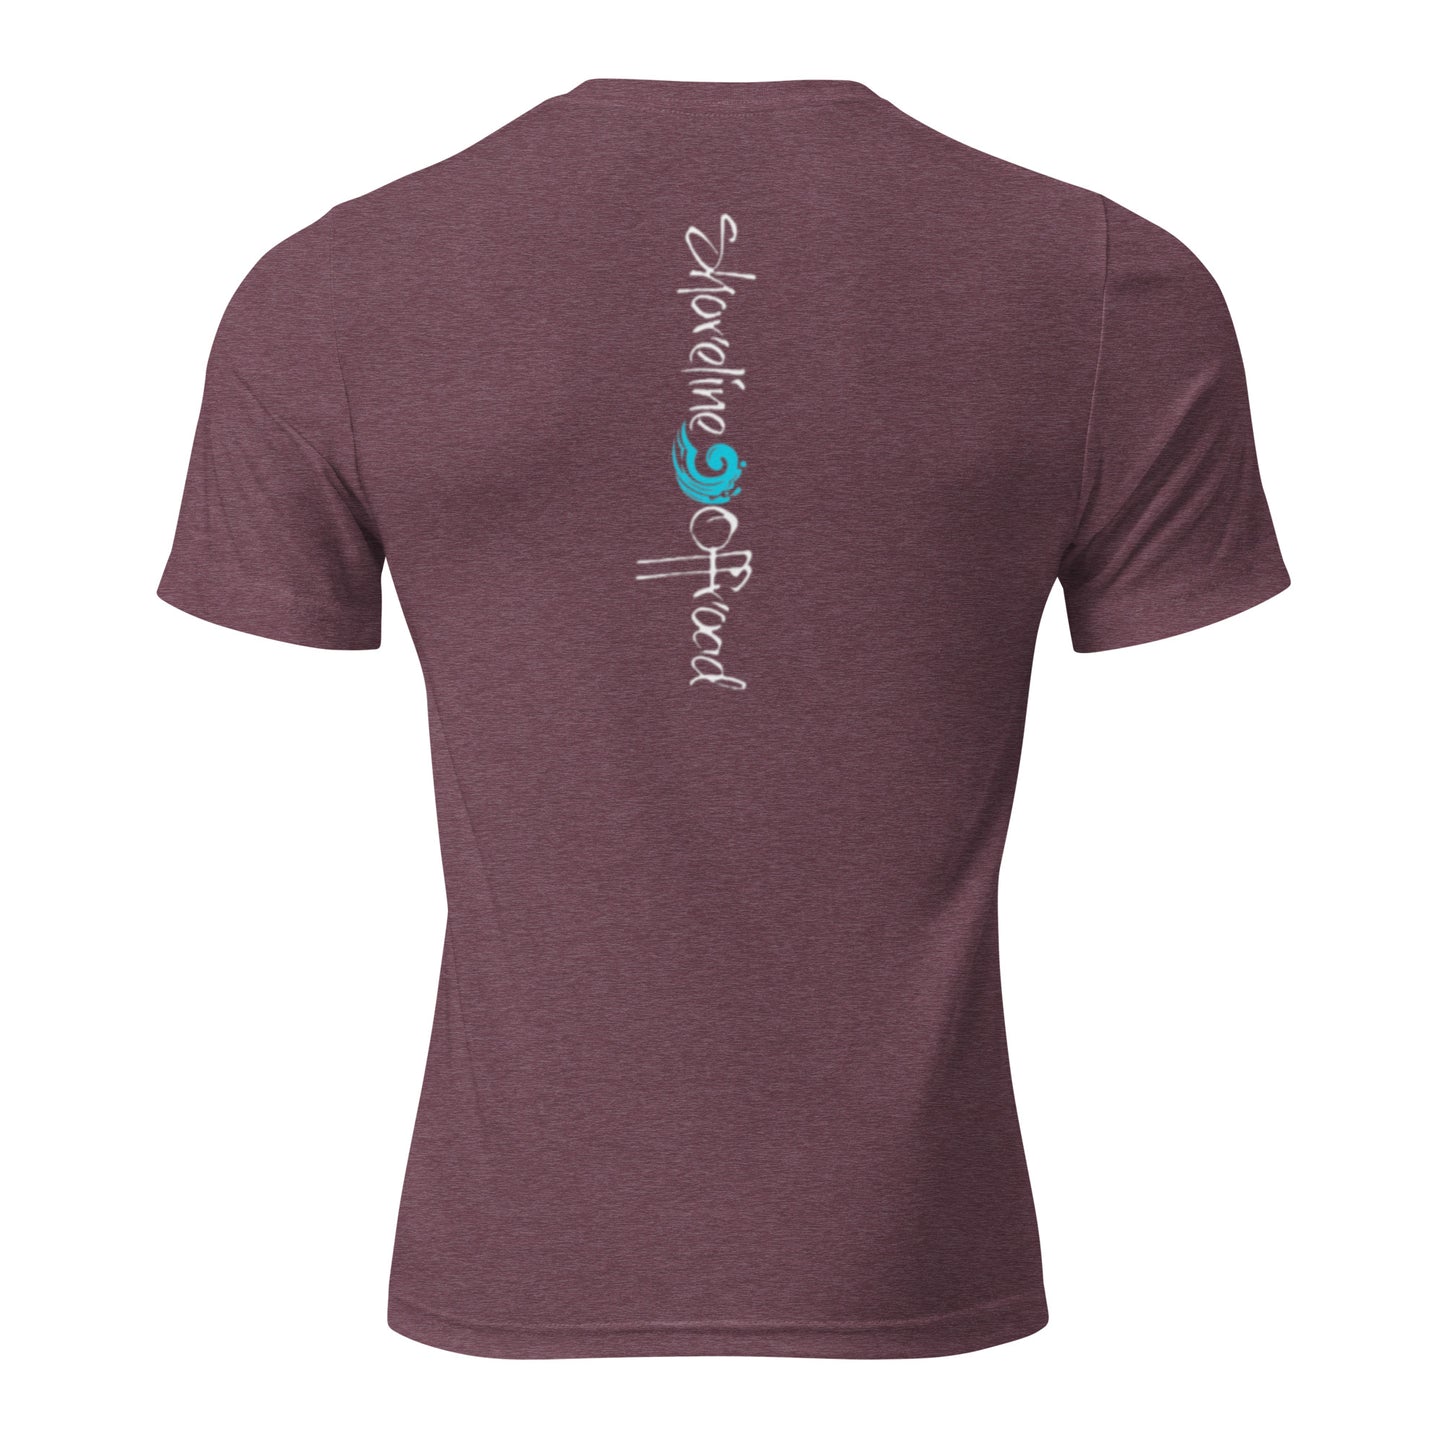 the back of a maroon shirt with a blue and green logo on it